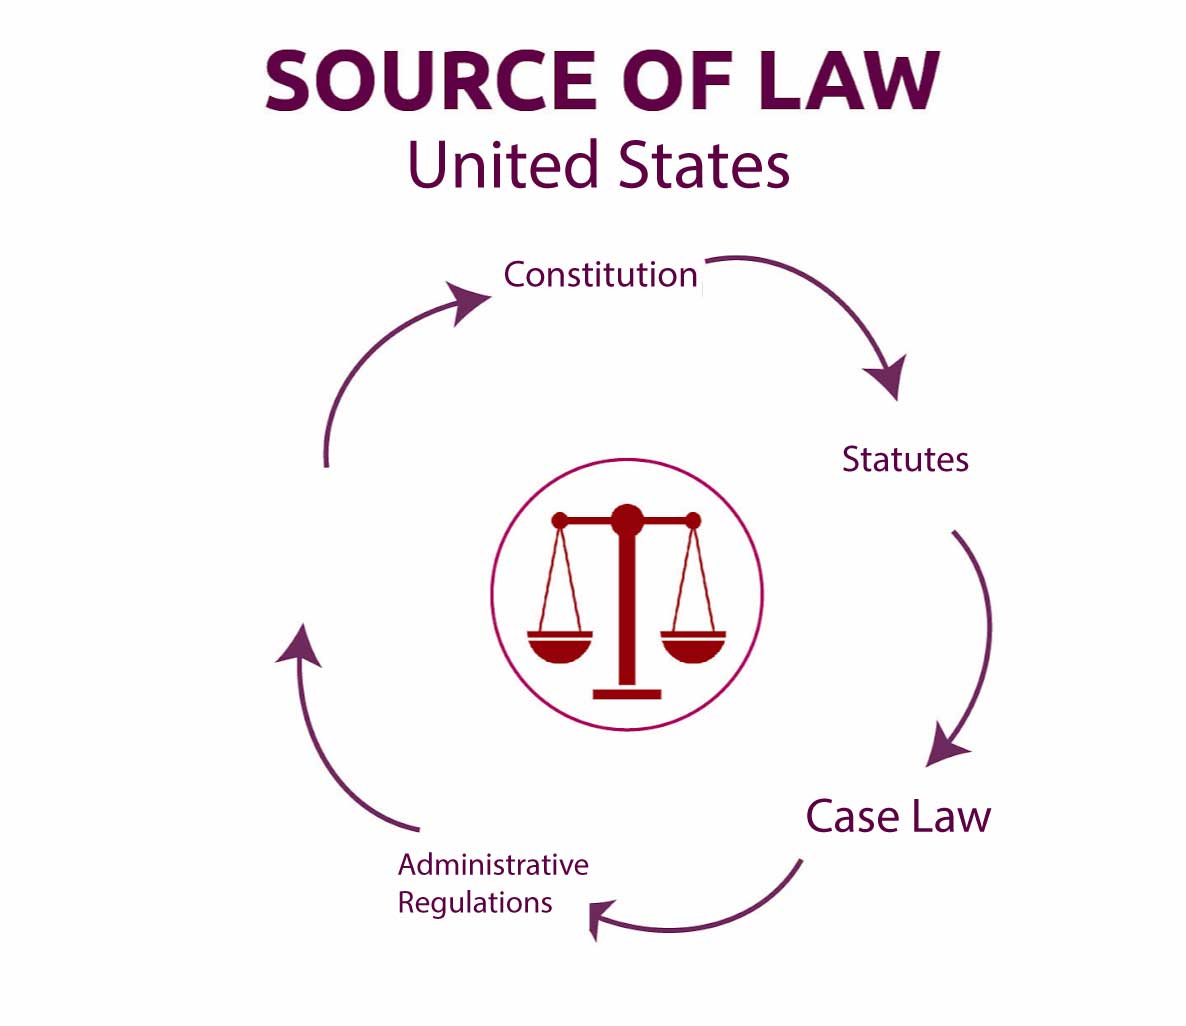 Sources of Law in the United States